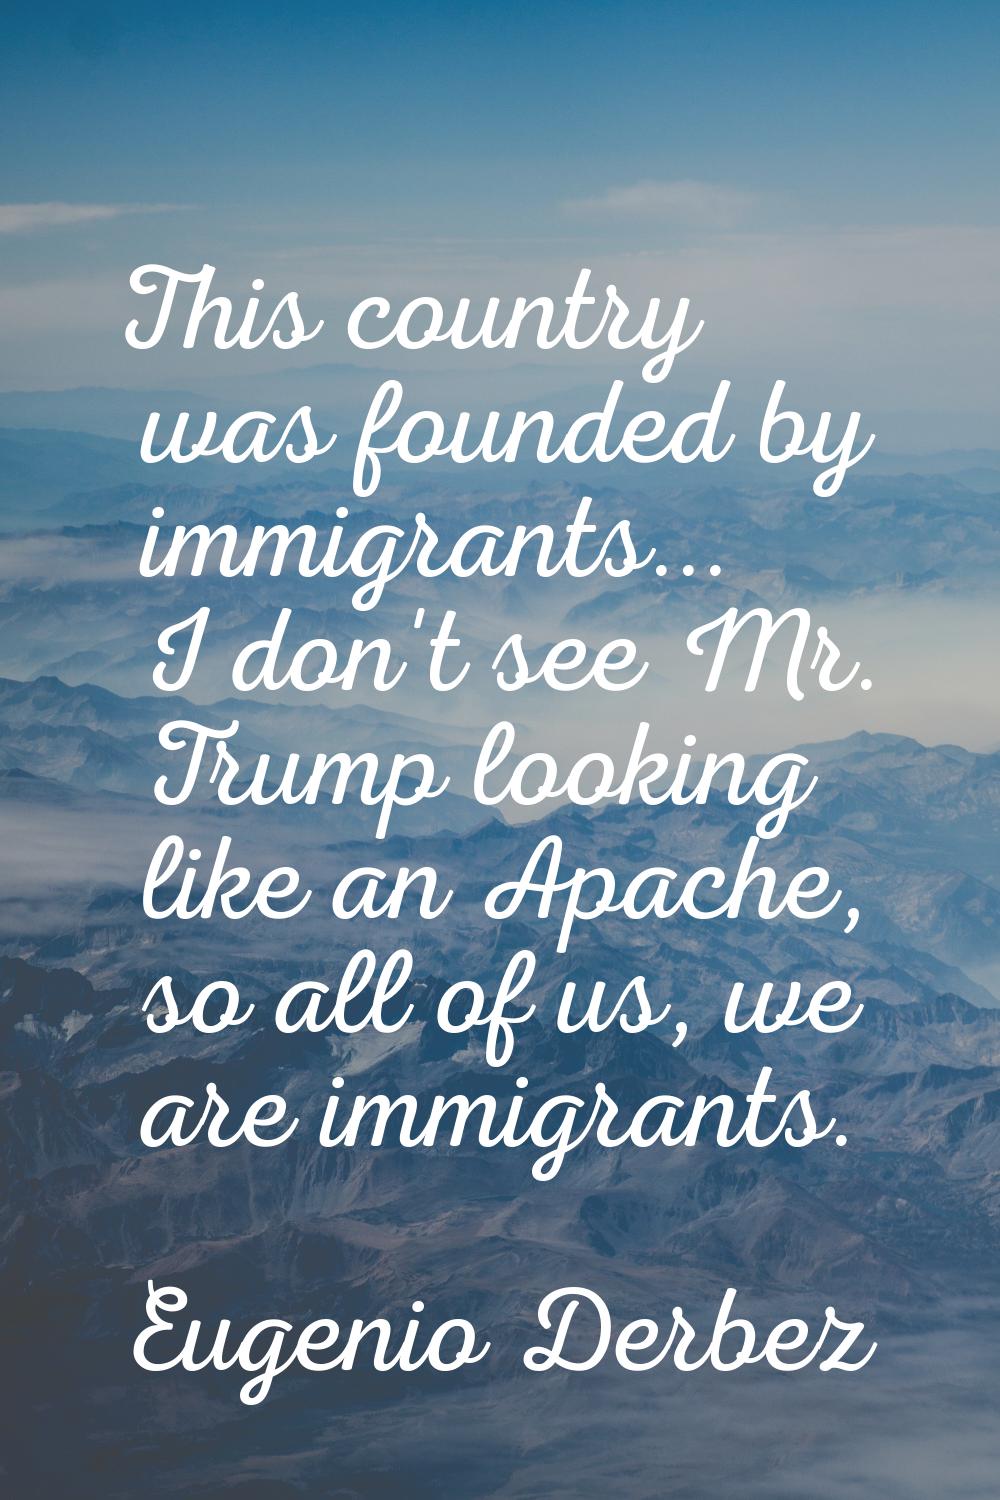 This country was founded by immigrants... I don't see Mr. Trump looking like an Apache, so all of u